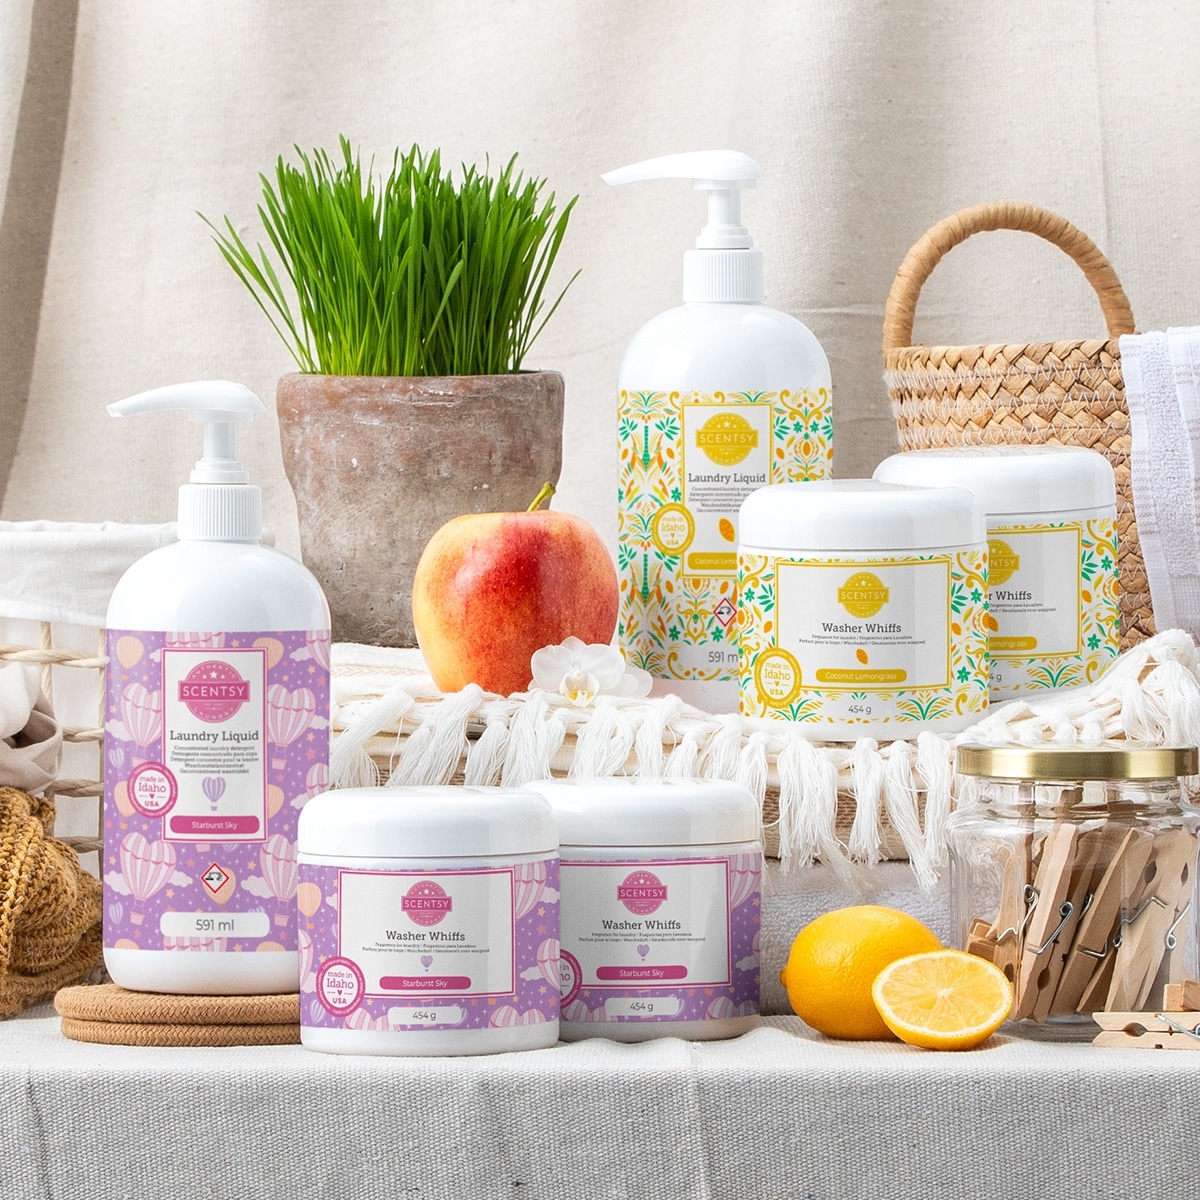 Scentsy April Laundry & Clean products